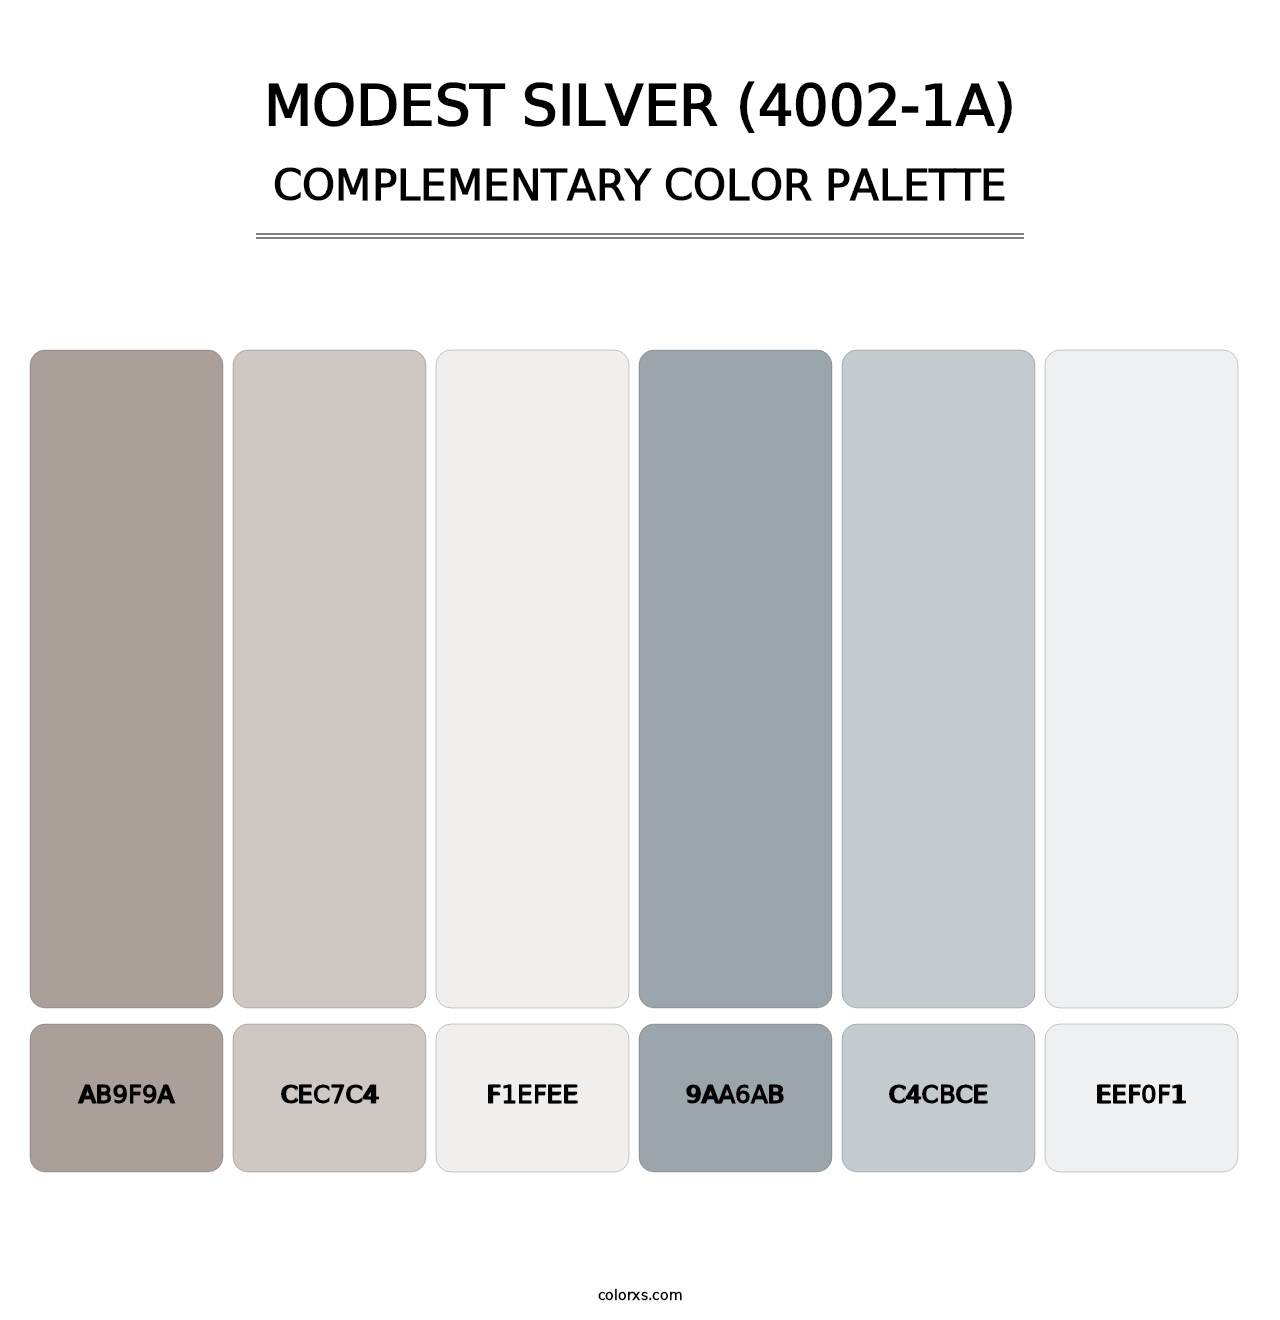 Modest Silver (4002-1A) - Complementary Color Palette